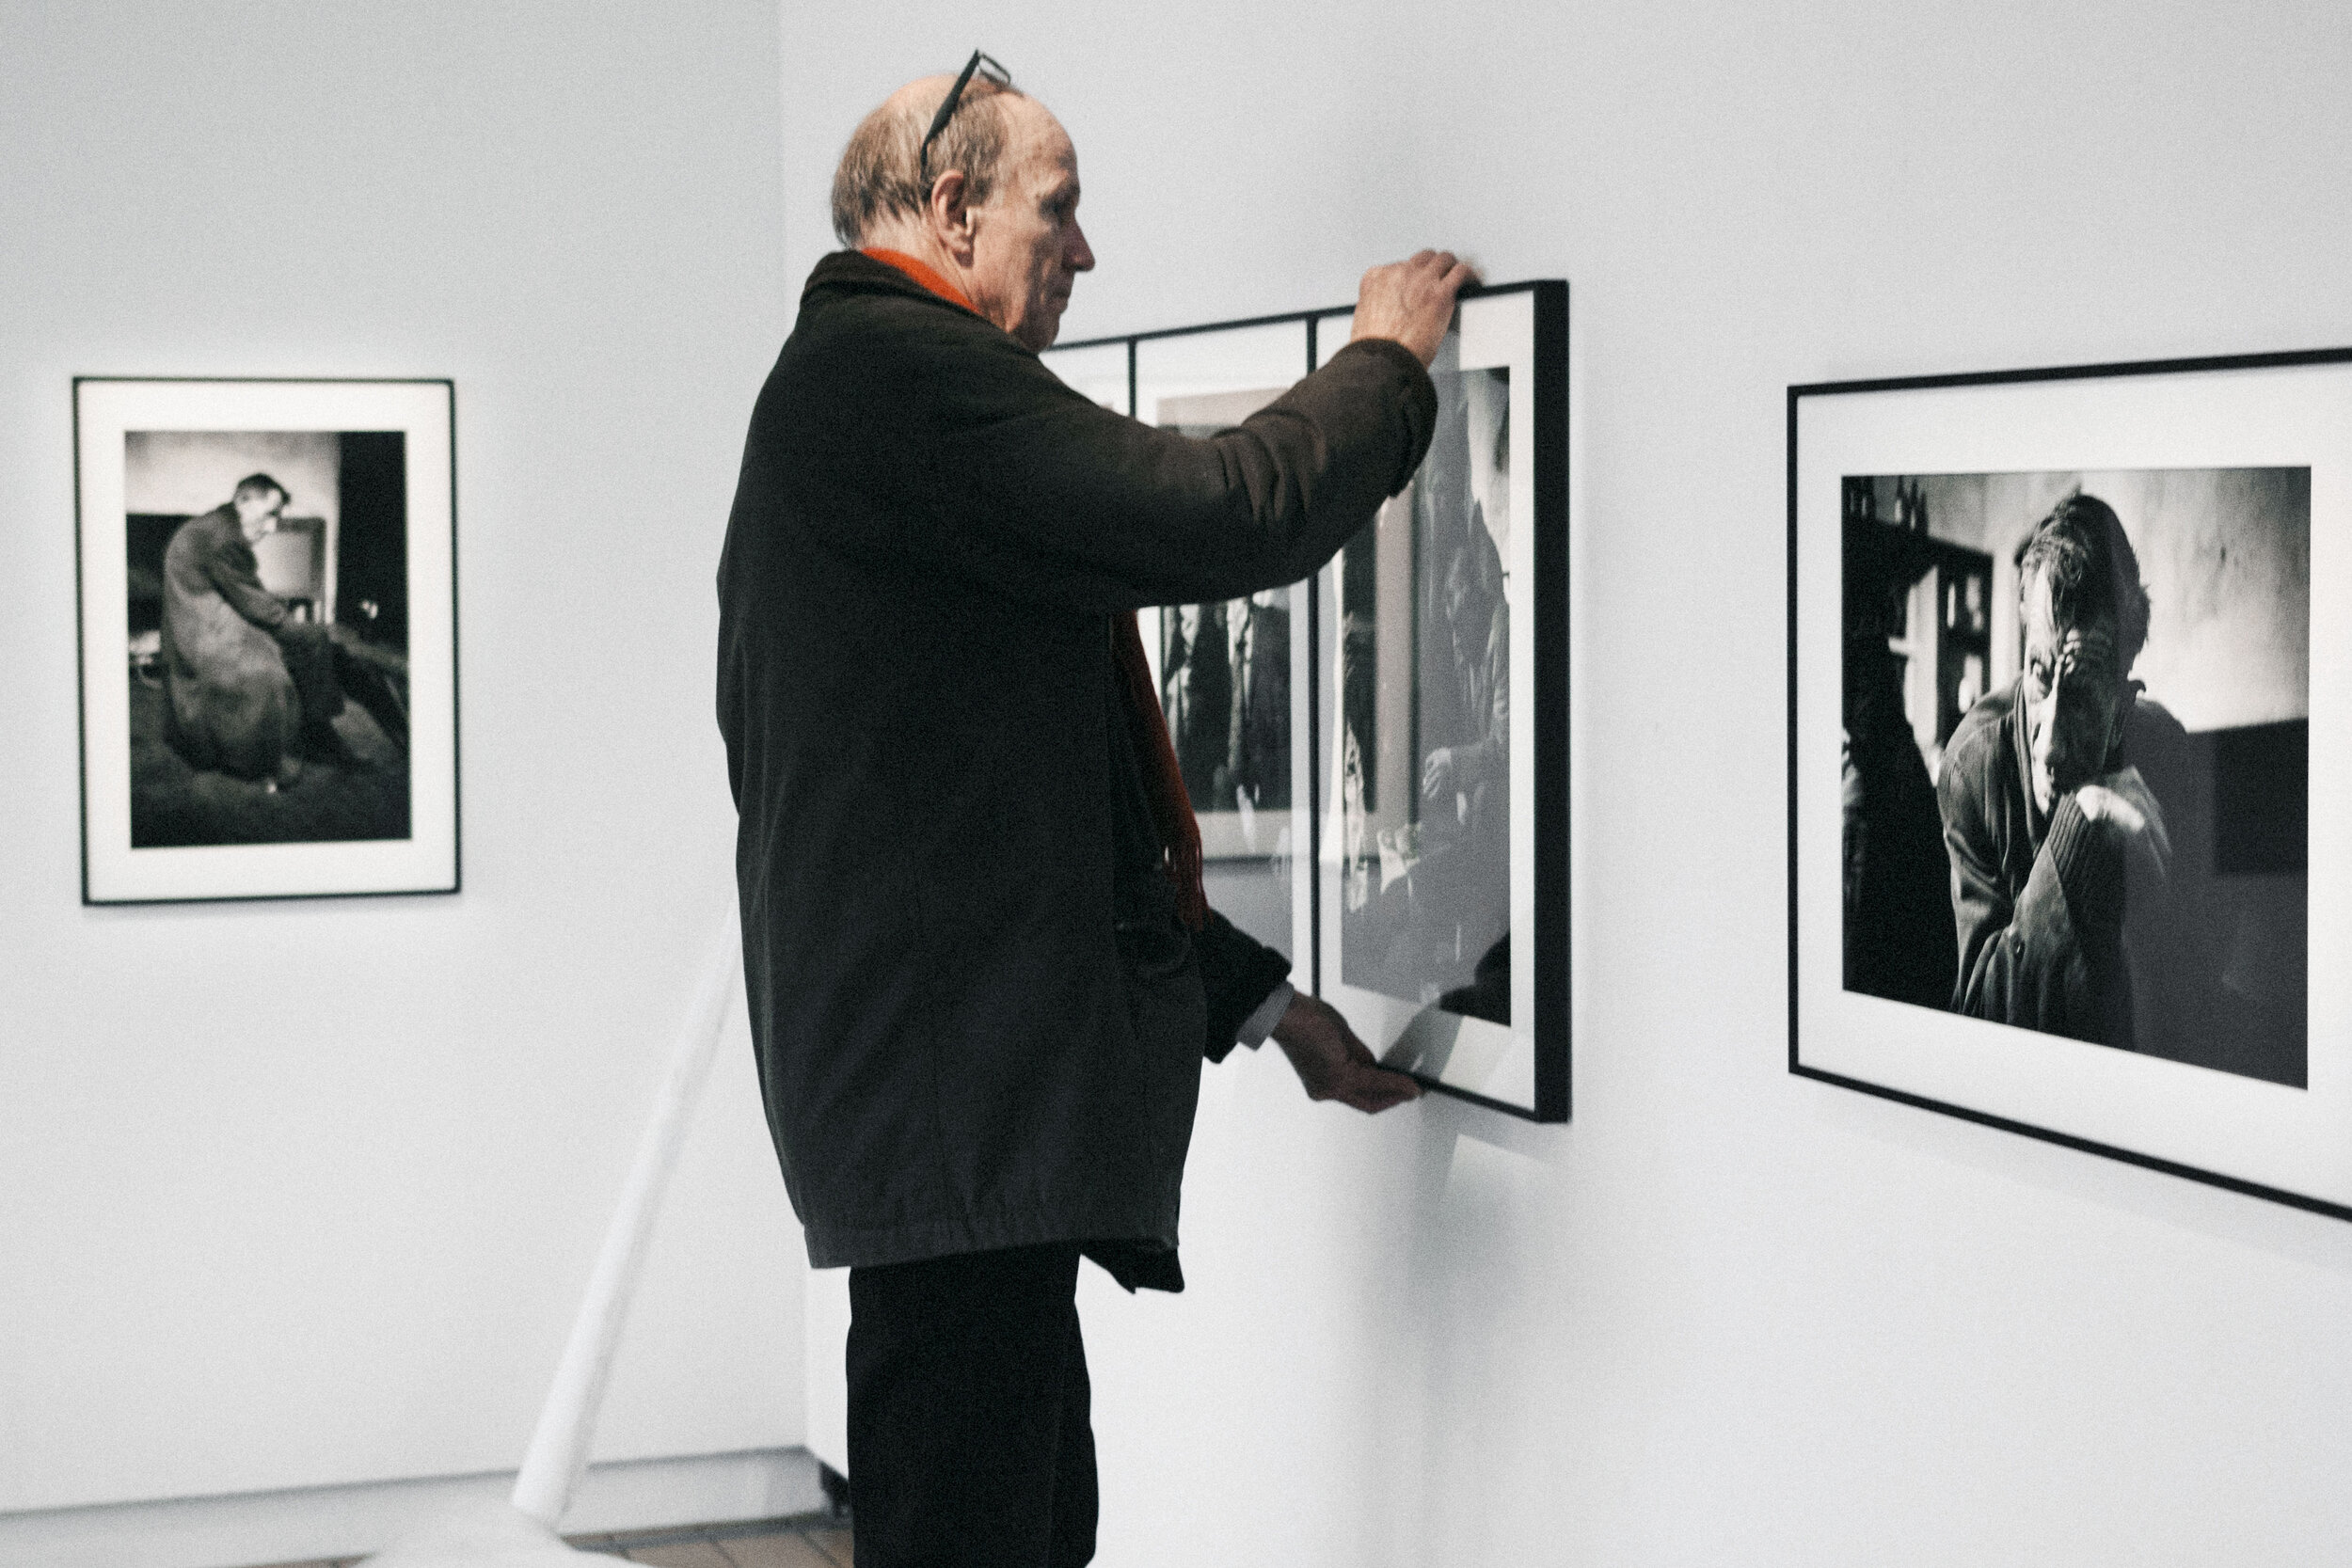  Artist Krass Clement putting up a photograph in his exhibition 'The Light Gleams An Instant’ 